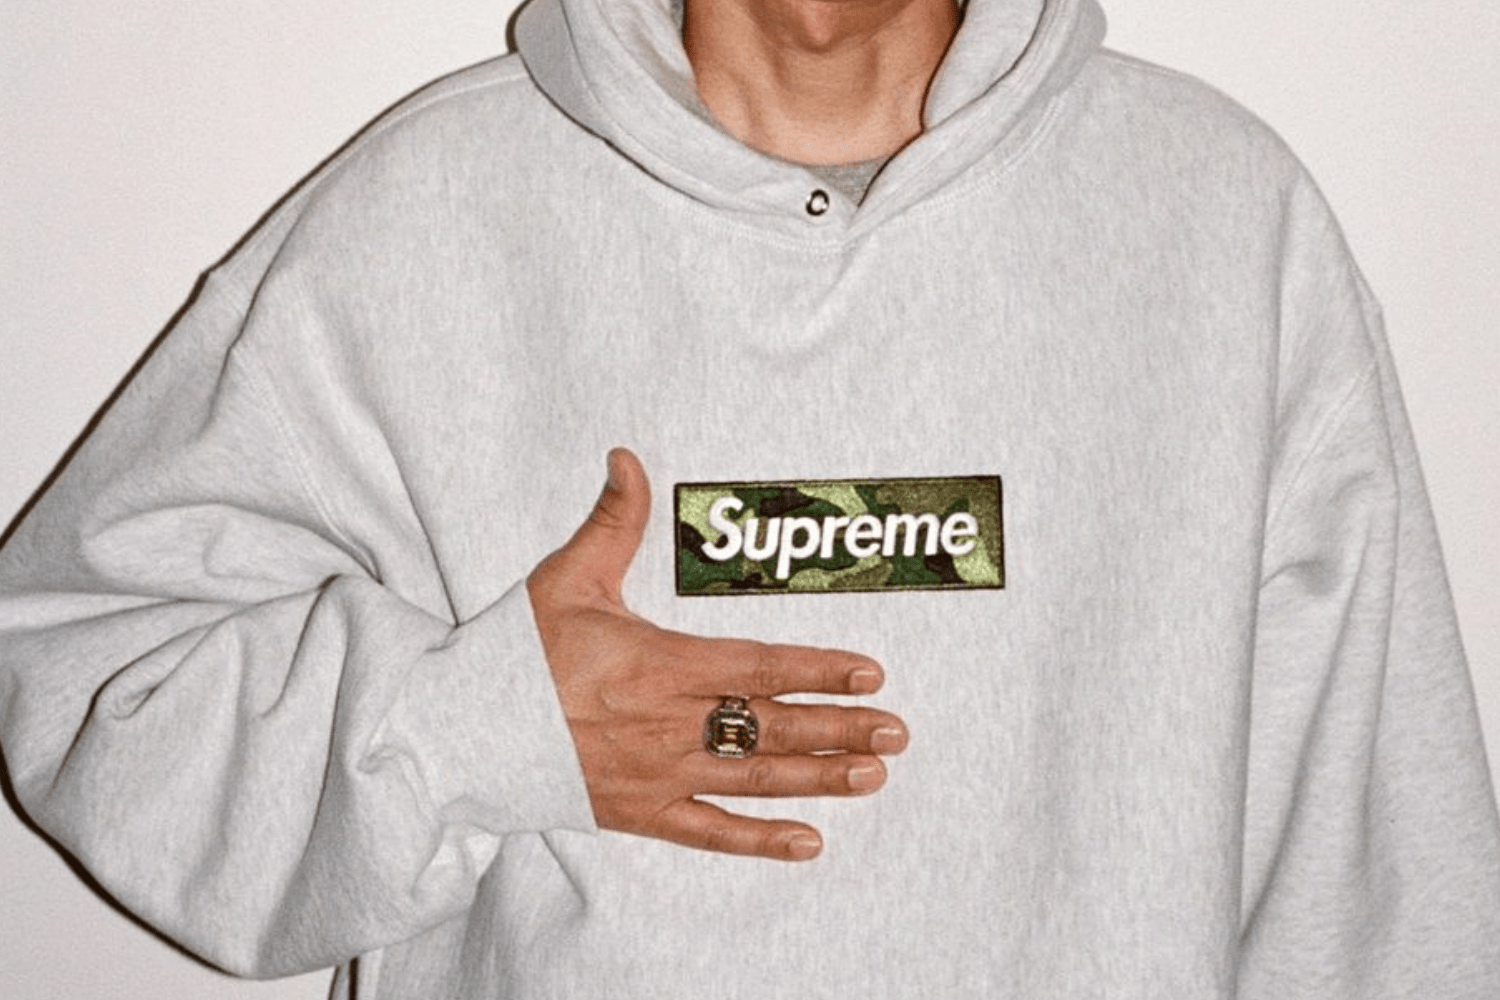 Shop your favorite Supreme collection at GOAT